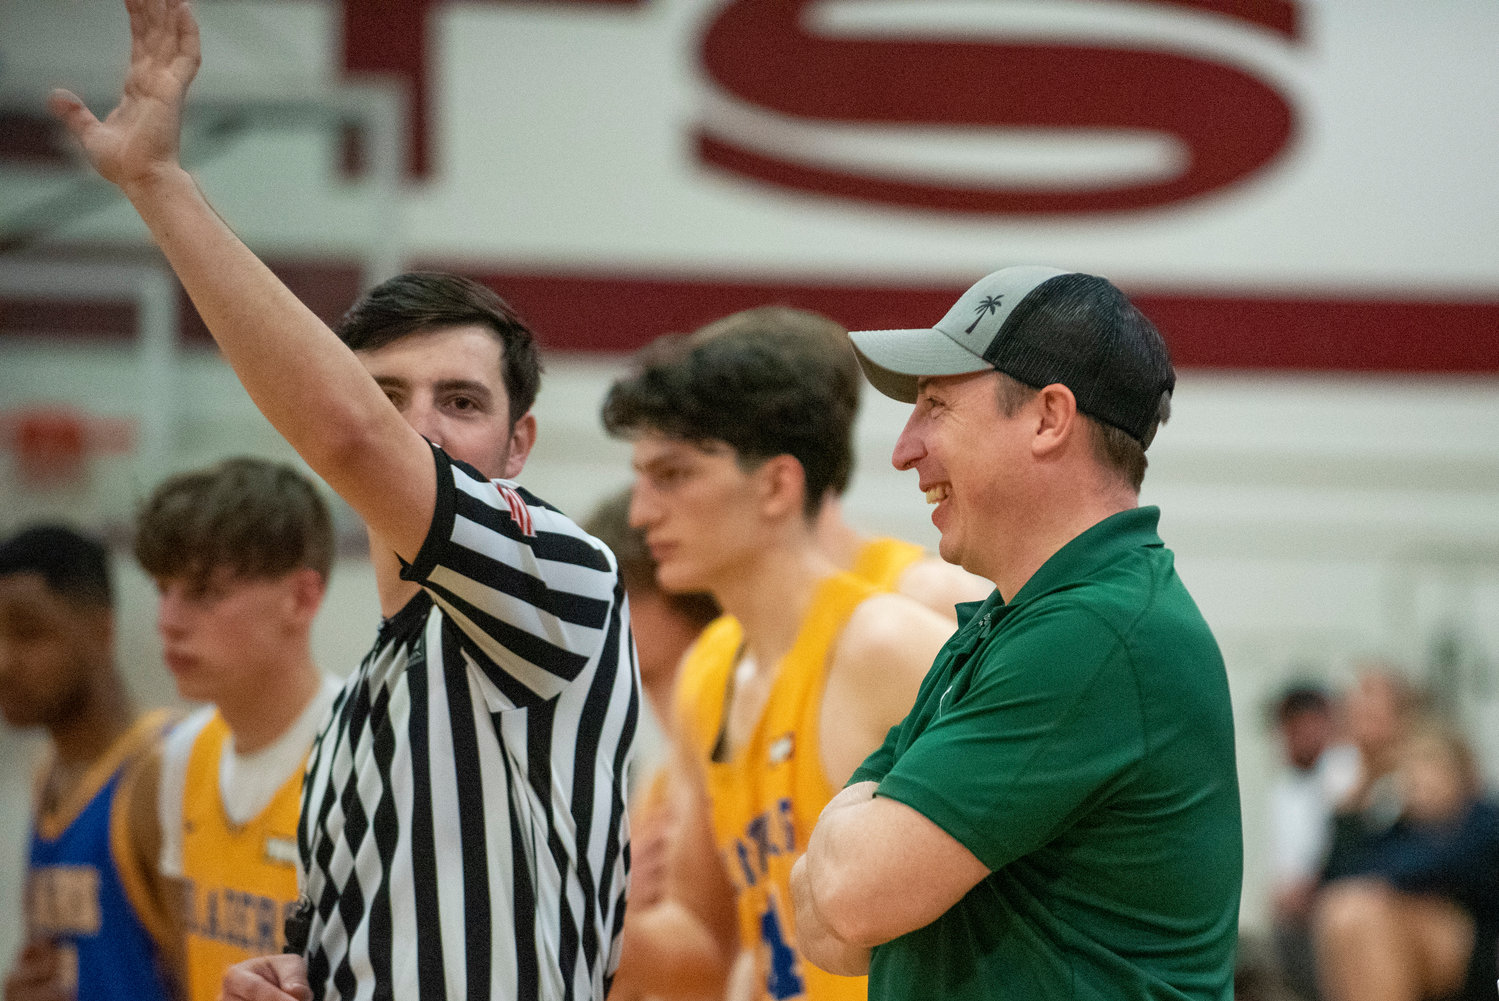 Morton-White Pass boys basketball coach Chad Cramer, right, talks with an official during the SWW Senior All-Star Game on March 26.